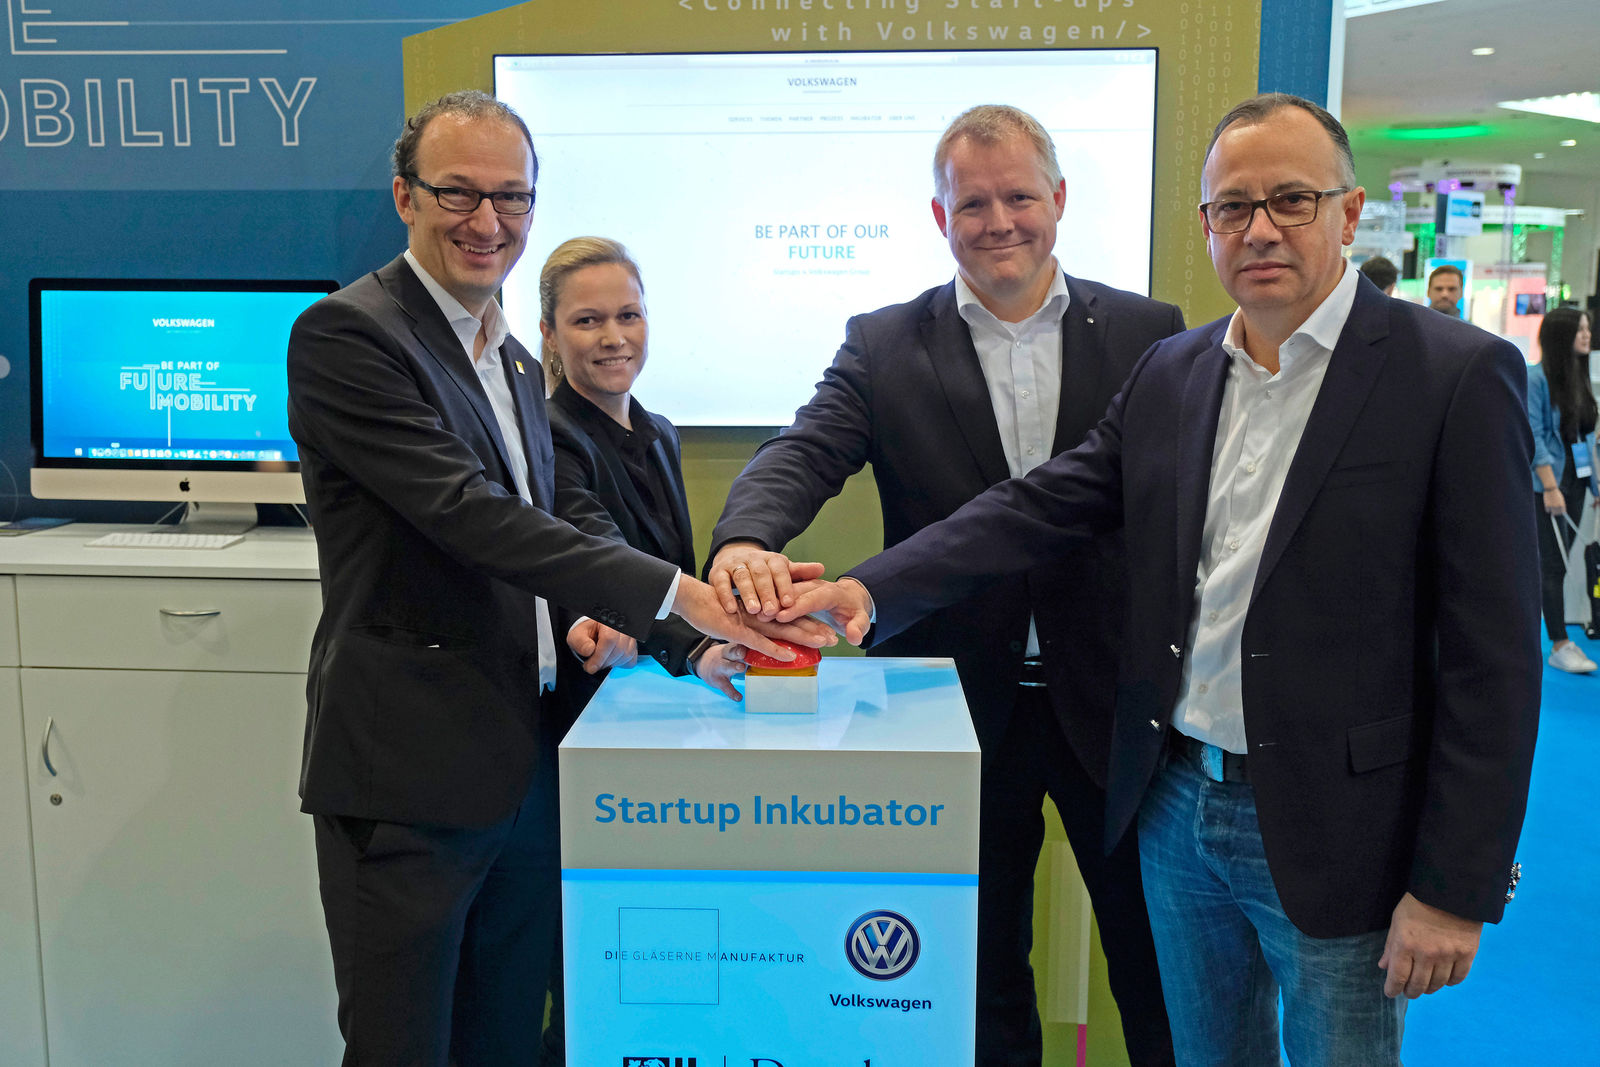 At CeBIT 2017: Transparent Factory launches start-up incubator program in Dresden